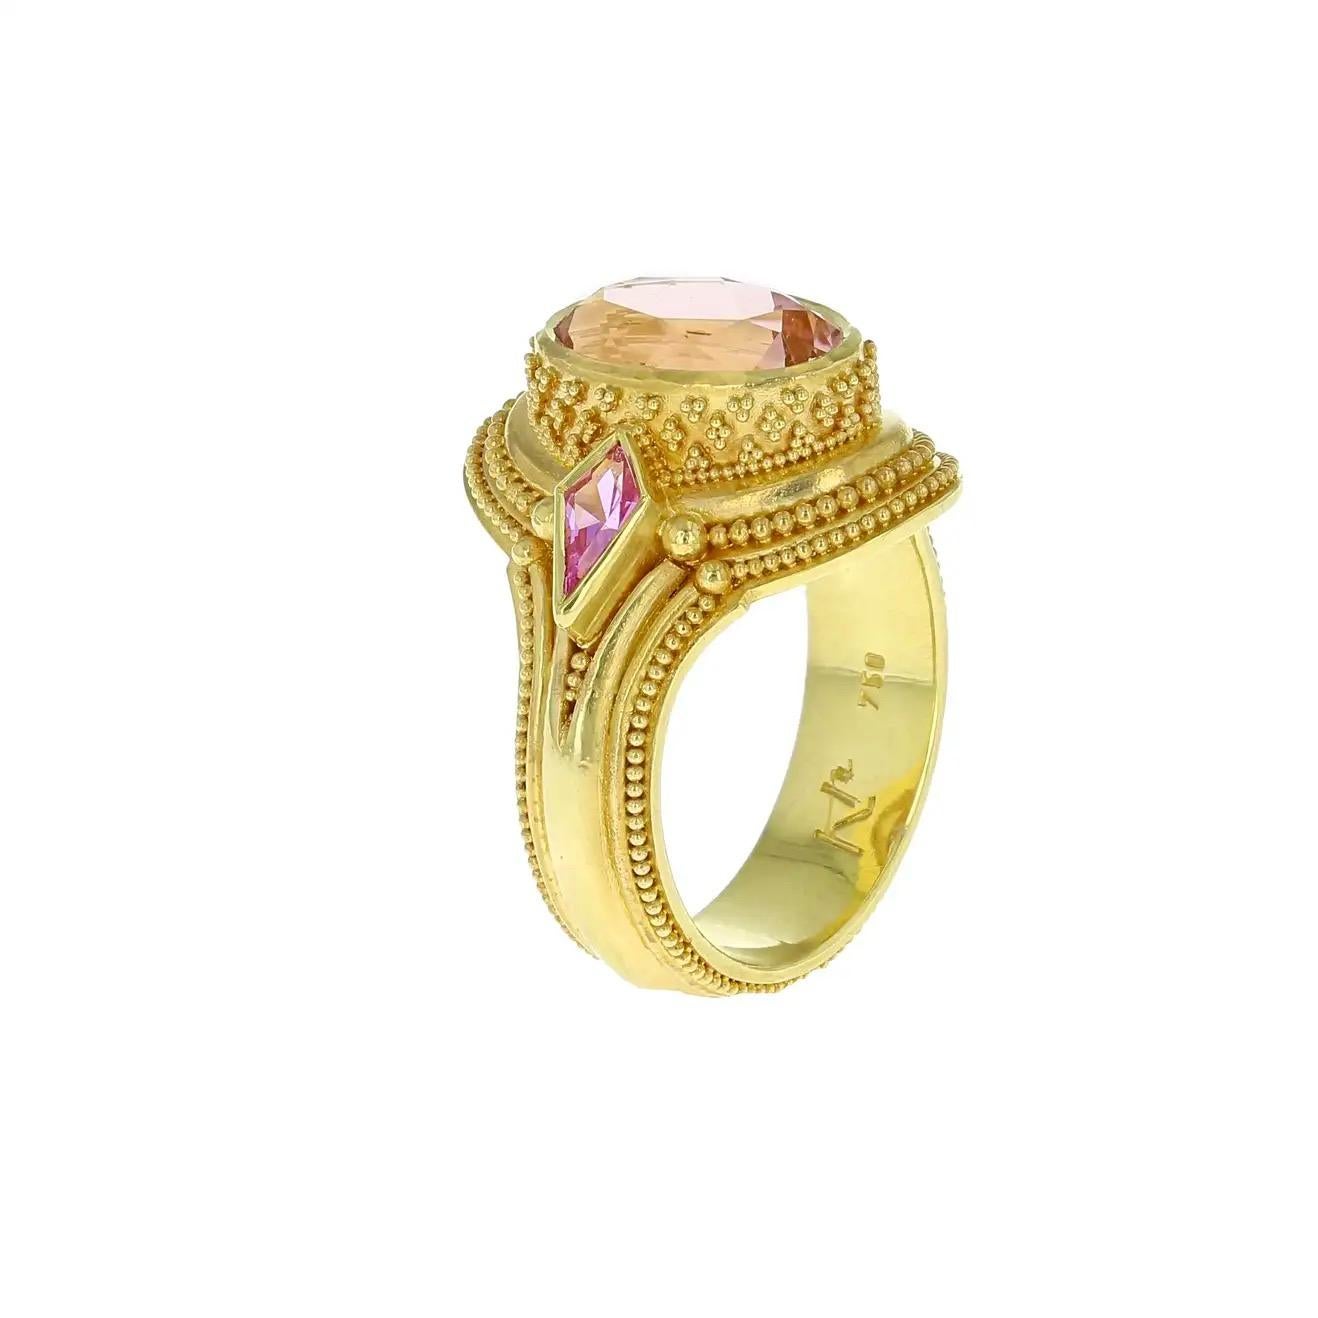 From the Kent Raible Masterworks collection we bring you this new and stunning bespoke ring featuring a gorgeous Peachy-Pink Tourmaline accented with Kite shaped Pink Sapphires. Check out all the intricate and finely crafted detailing on this ring!